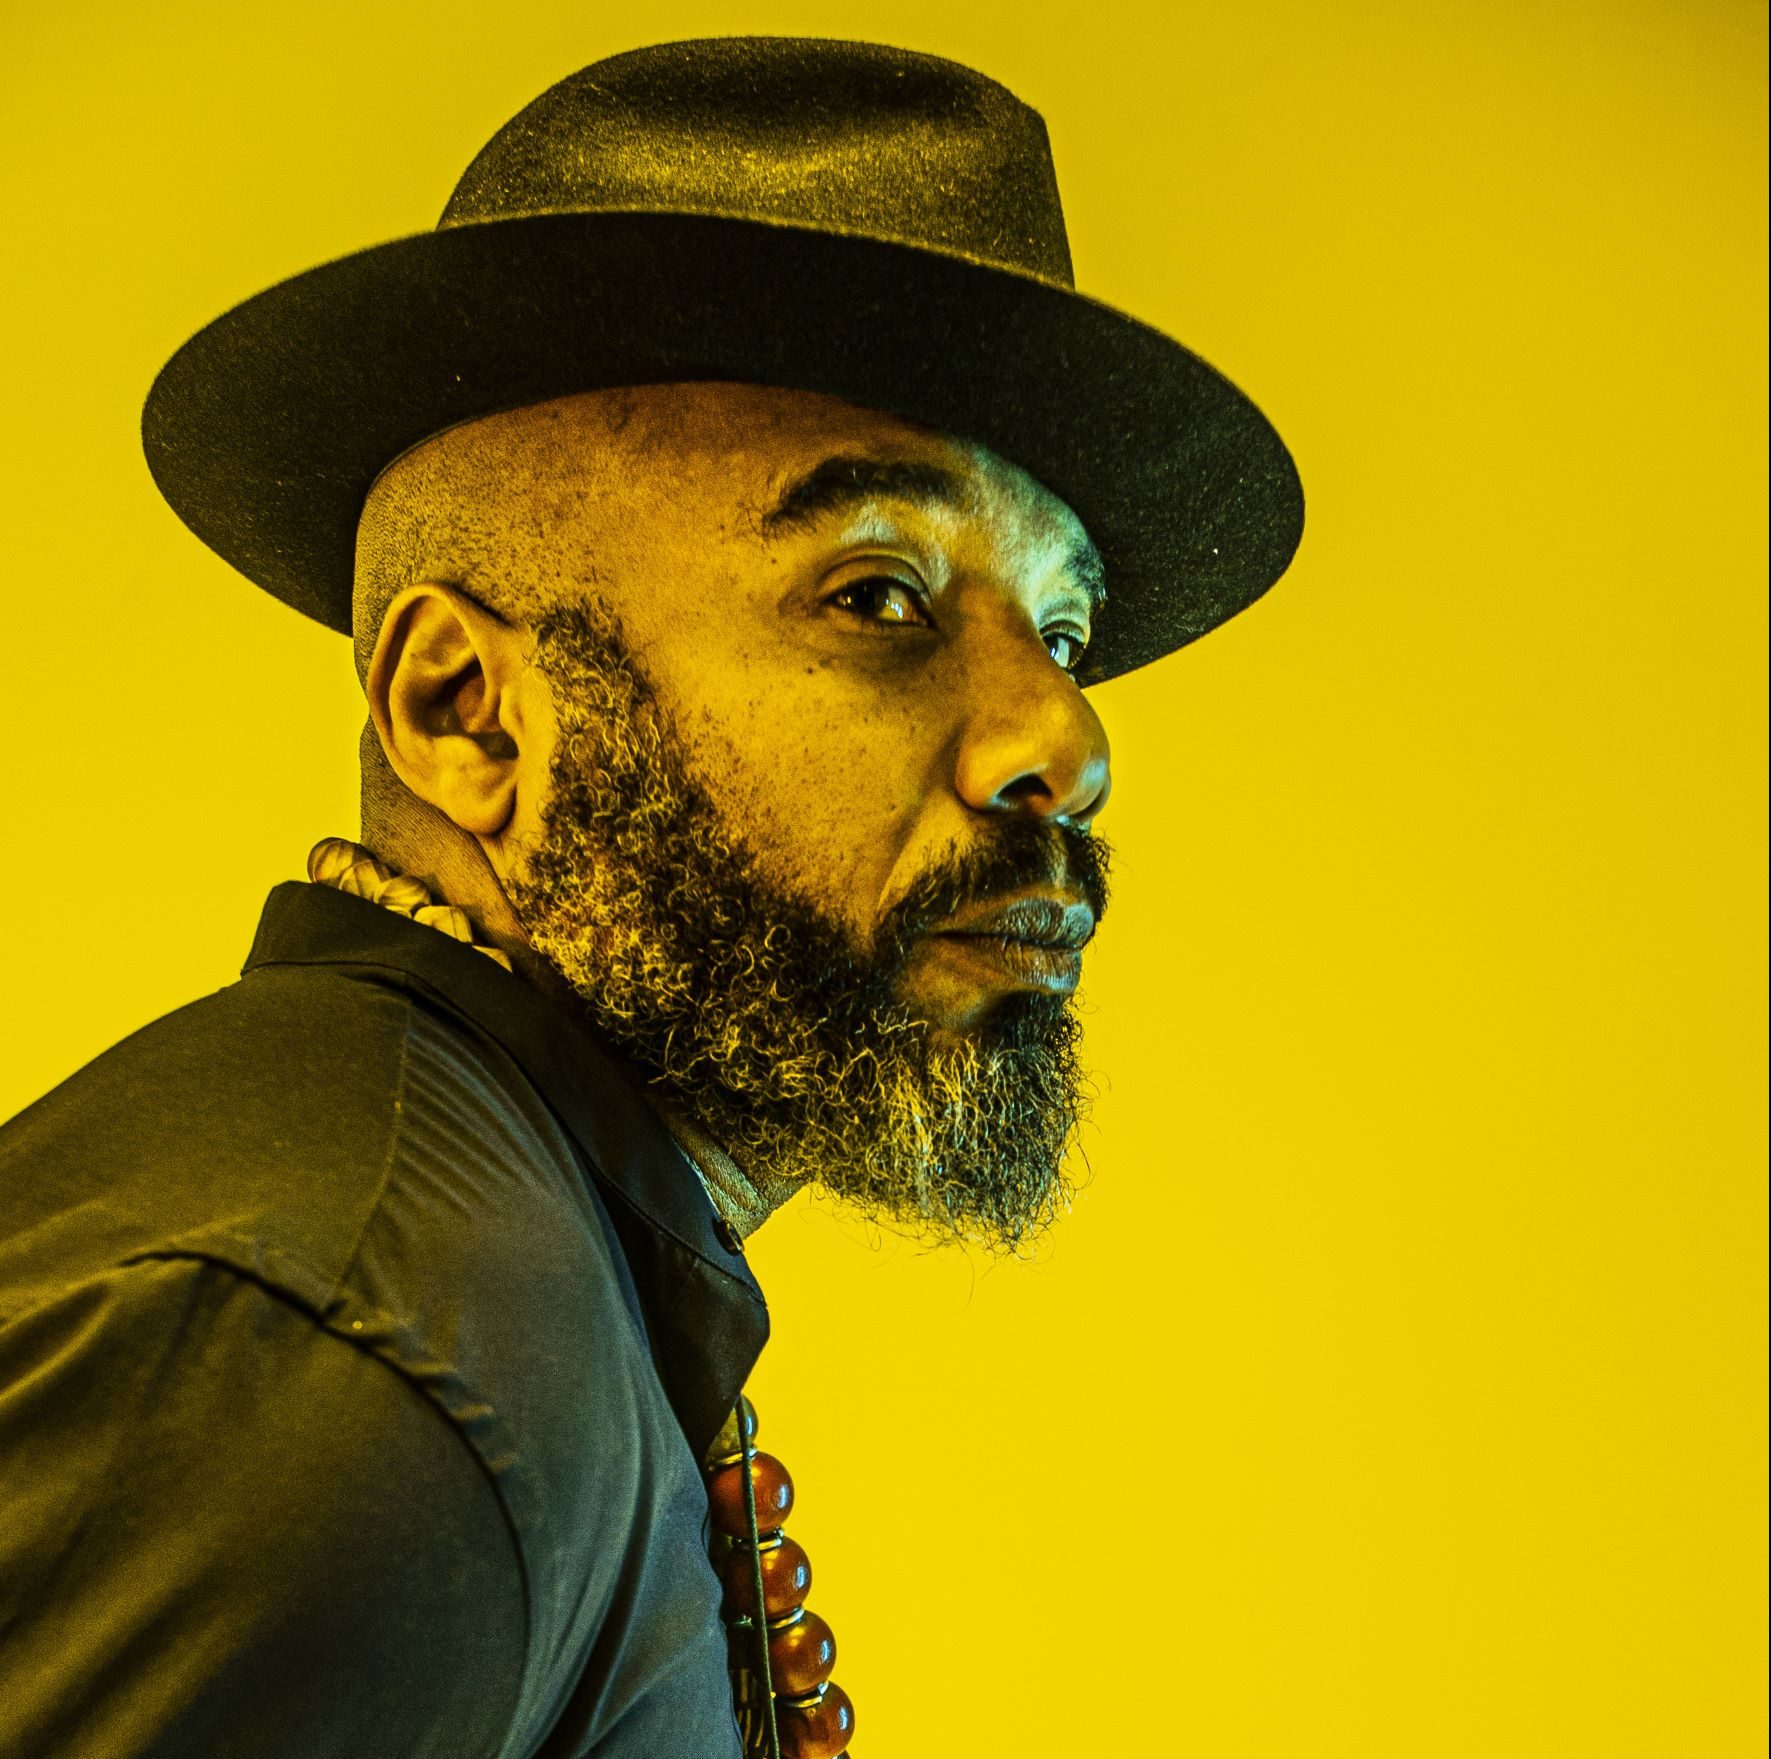 An image of Caribbean writer Anthony Joseph. He is wearing a black trilby, black shirt and is bearded. This image is a side profile and features a yellow background.